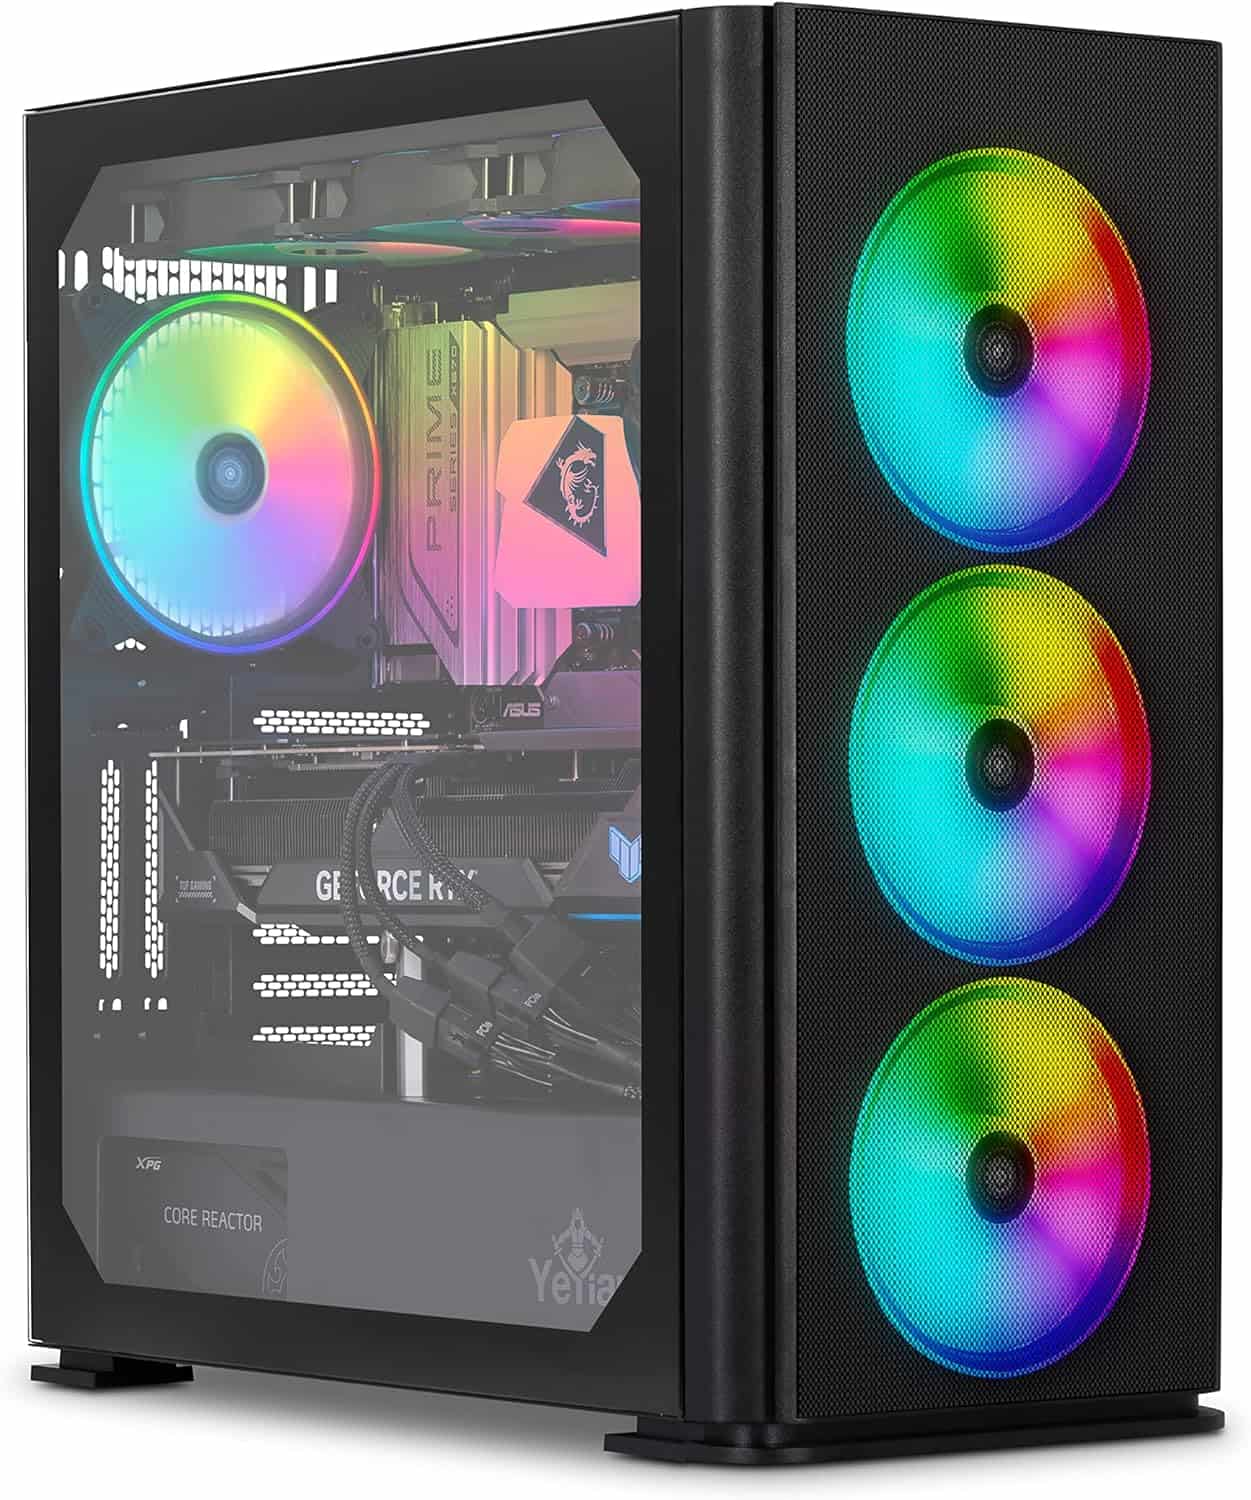 A modern YEYIAN ODACHI gaming PC with RGB lighting and a transparent side panel showcasing the internal components.